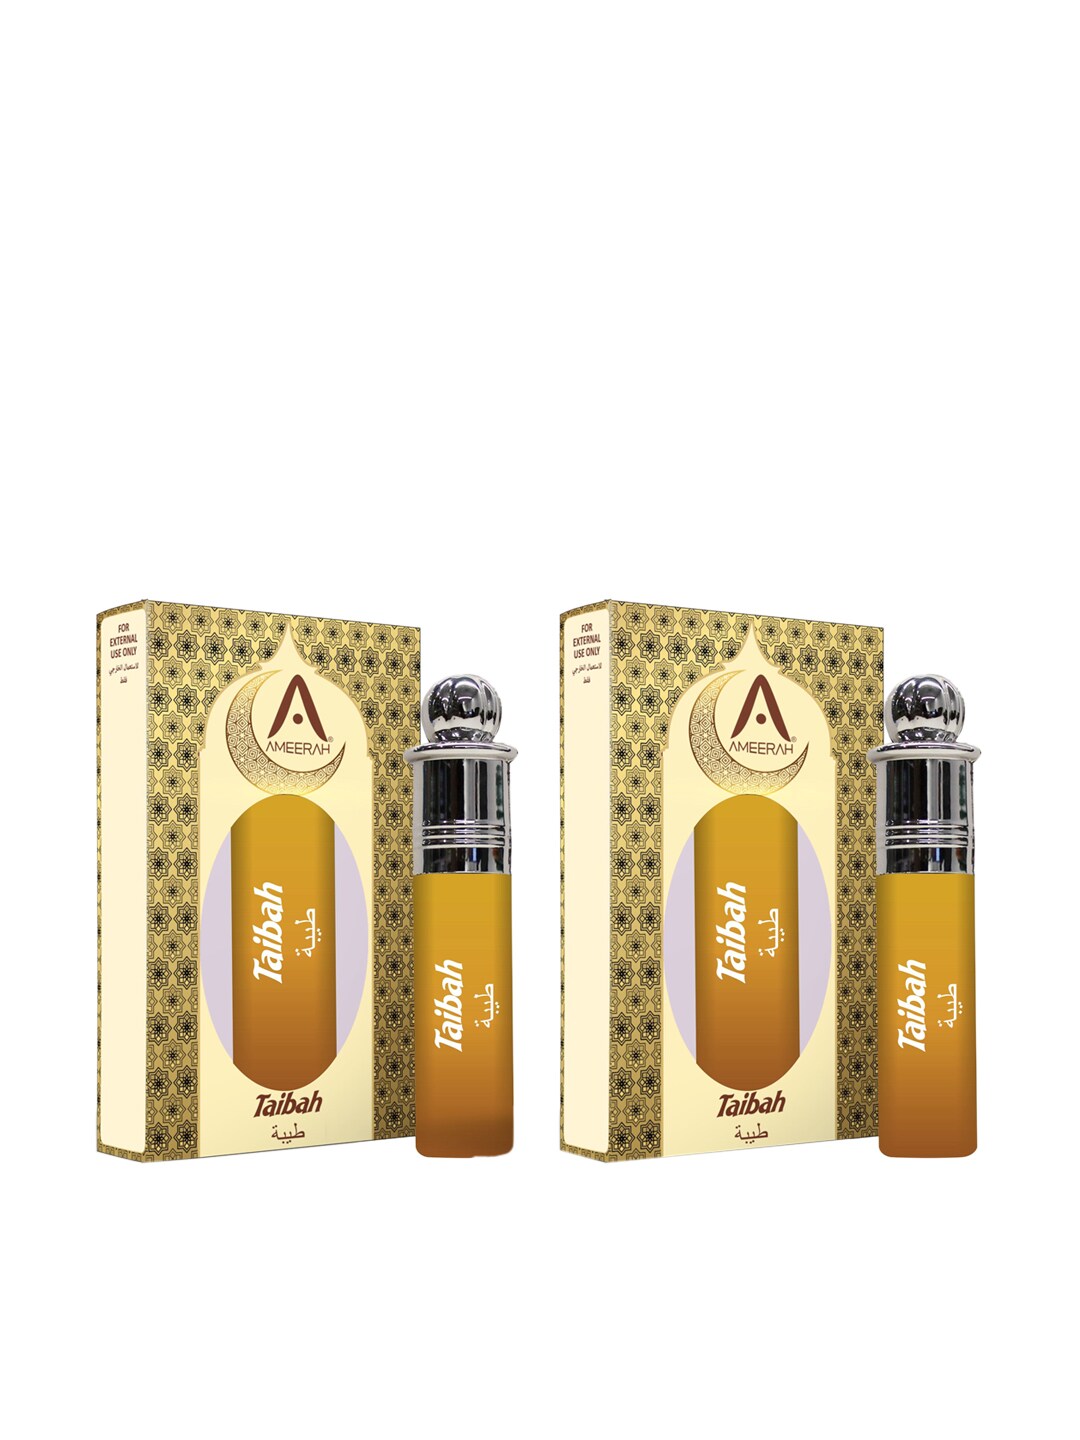 St. John Set of 2 Ameerah Taibah Attar Roll On - 8 ml Each Price in India